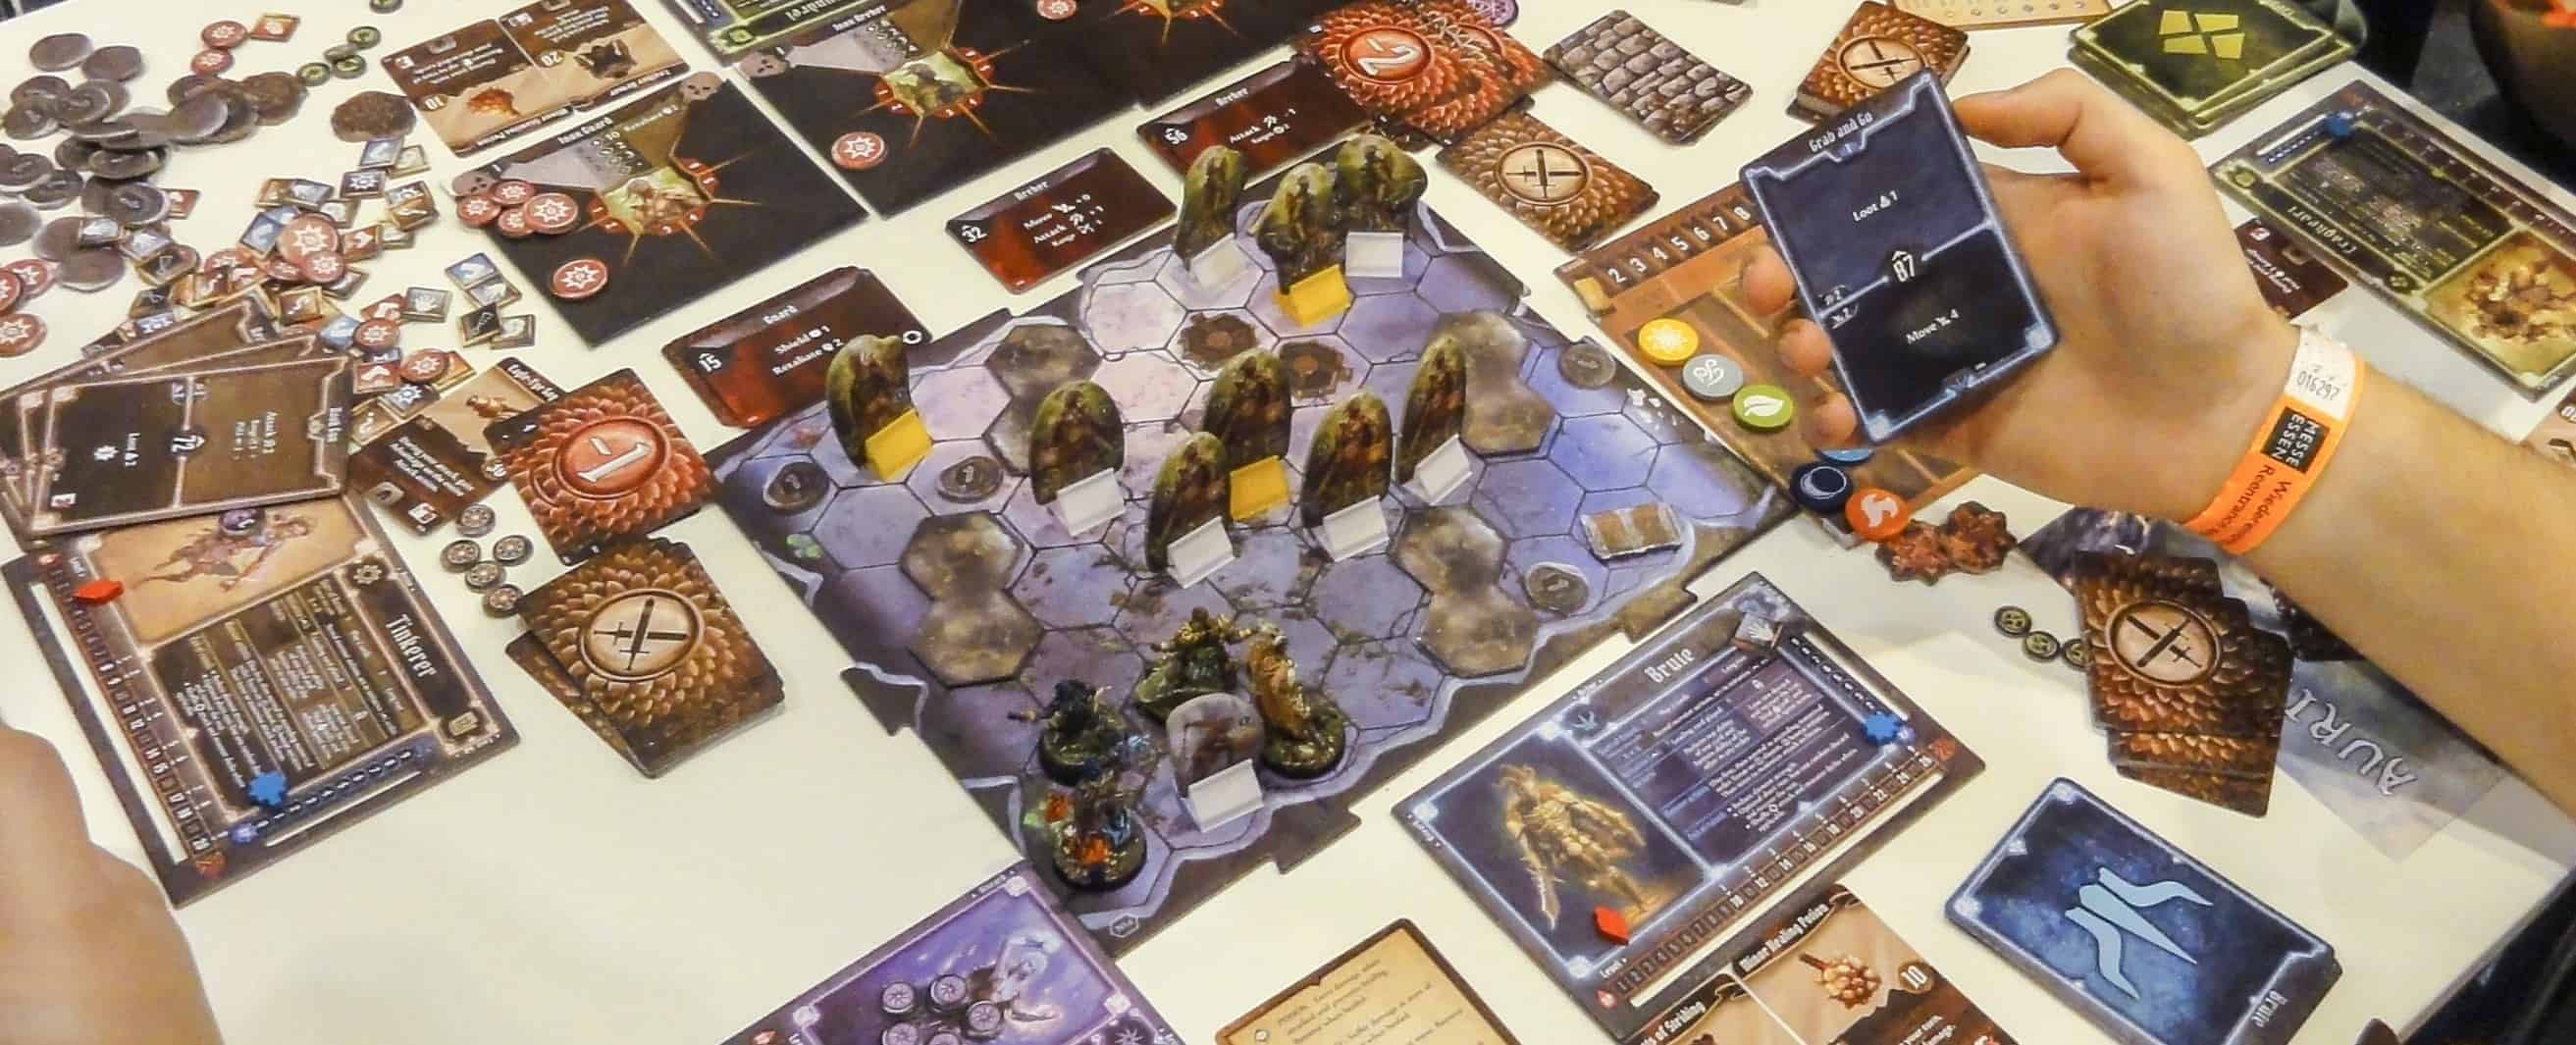 Gloomhaven is not only the best coop board game according to BGG , it is the best board game in the world!